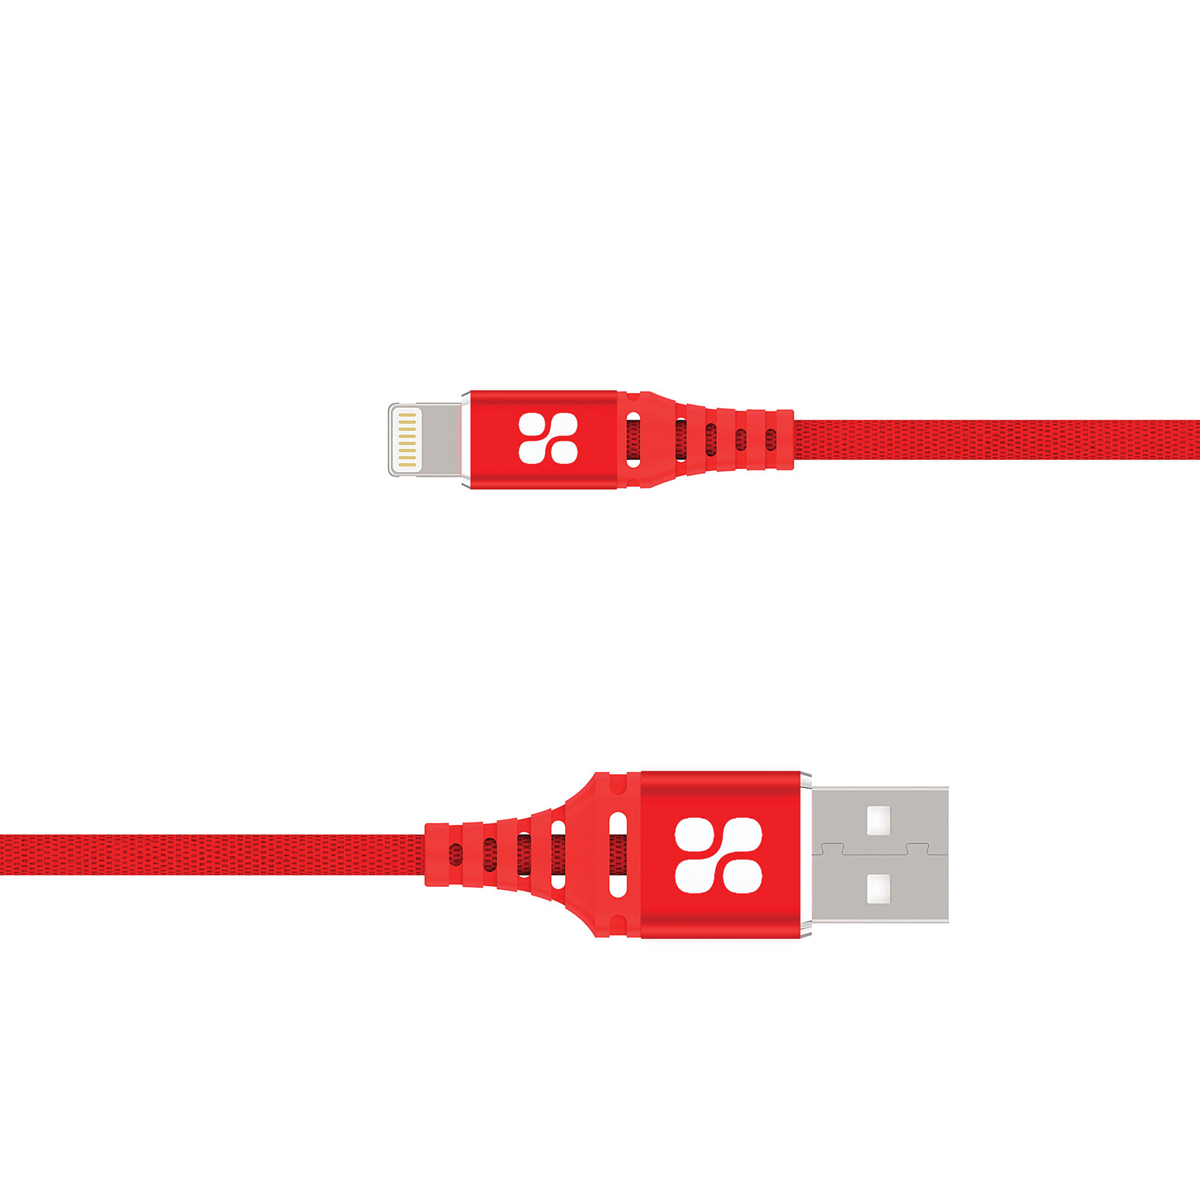 PROMATE Nervelink-i Ultra-Slim Power and Data Cable with Lightning Connector ( RED )